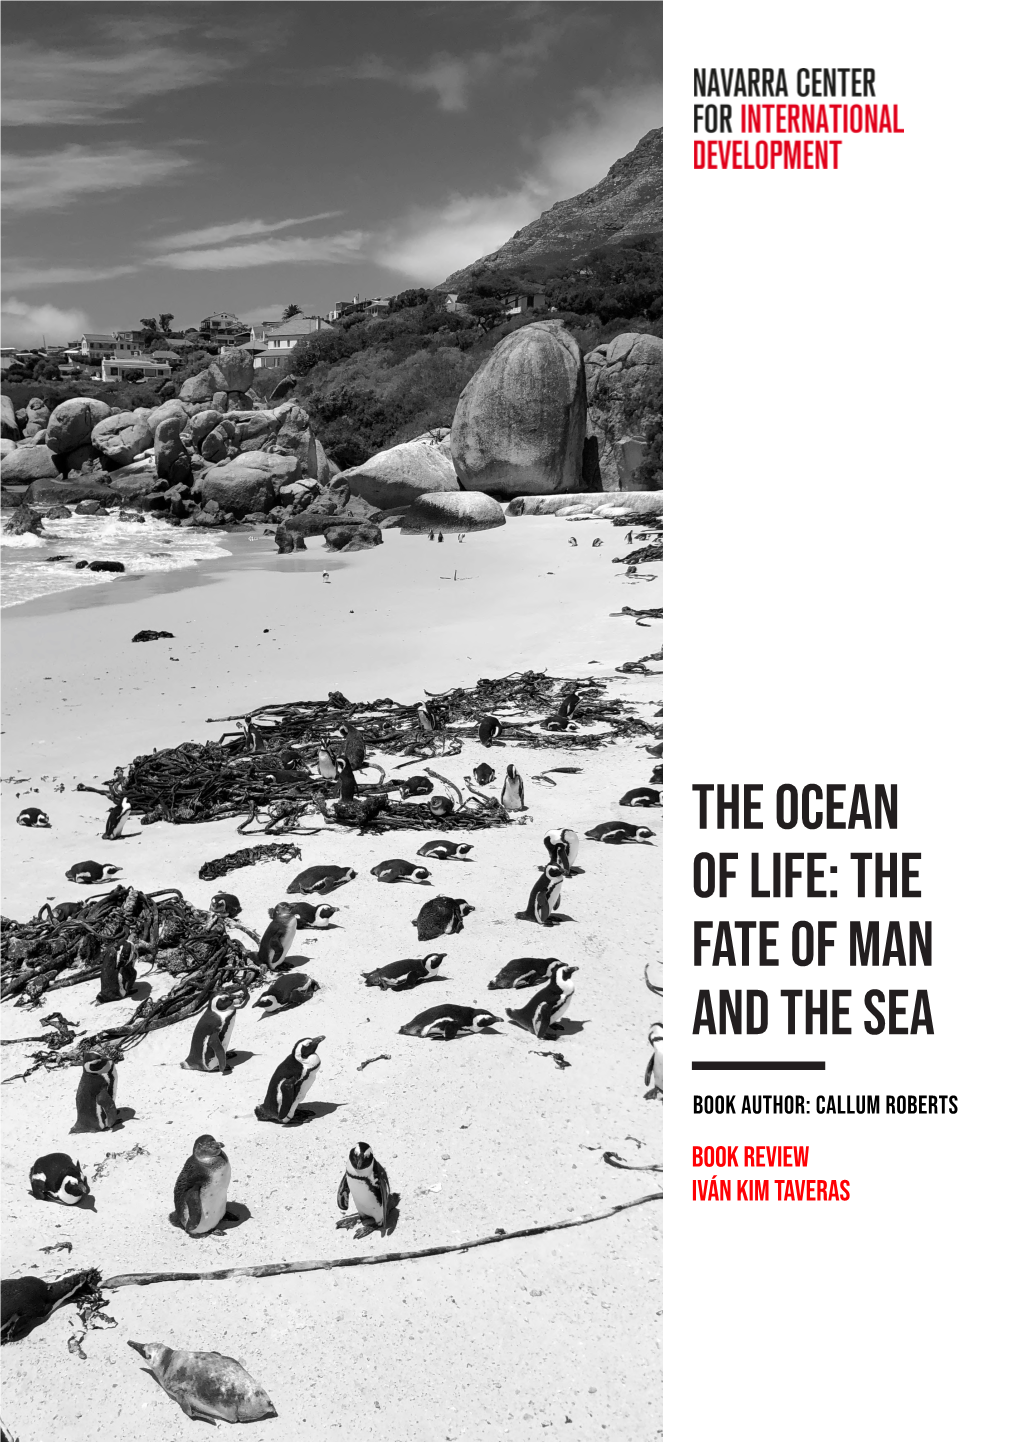 The Ocean of Life: the Fate of Man and The